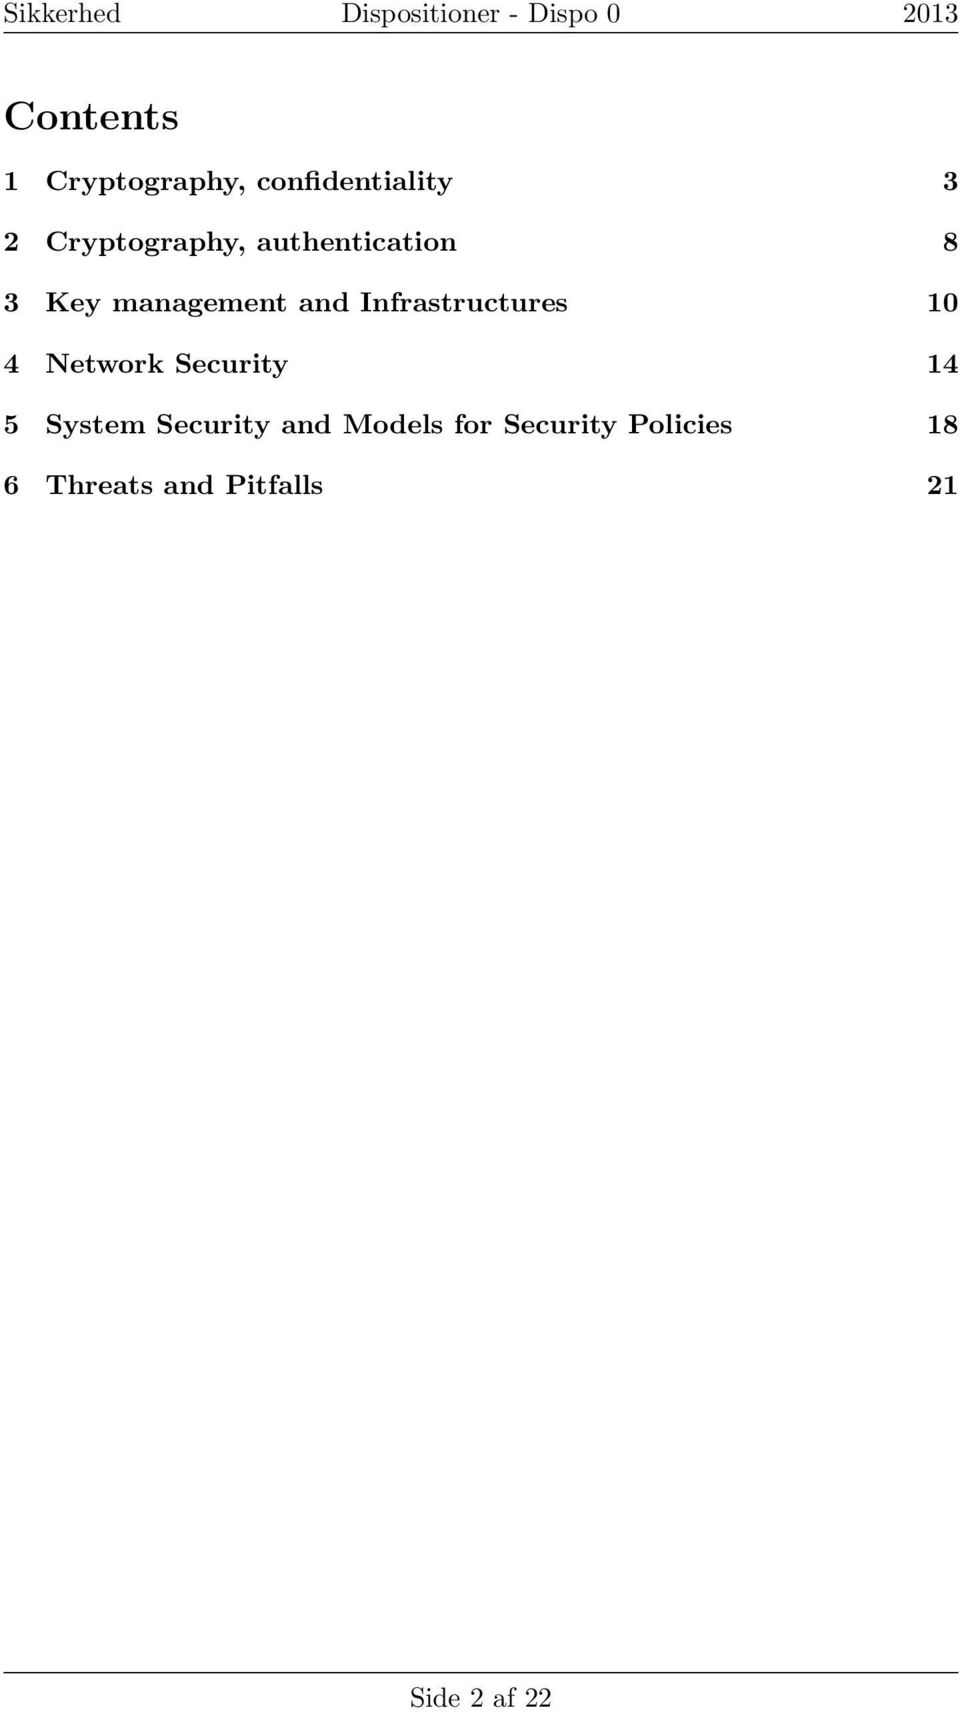 and Infrastructures 10 4 Network Security 14 5 System Security and